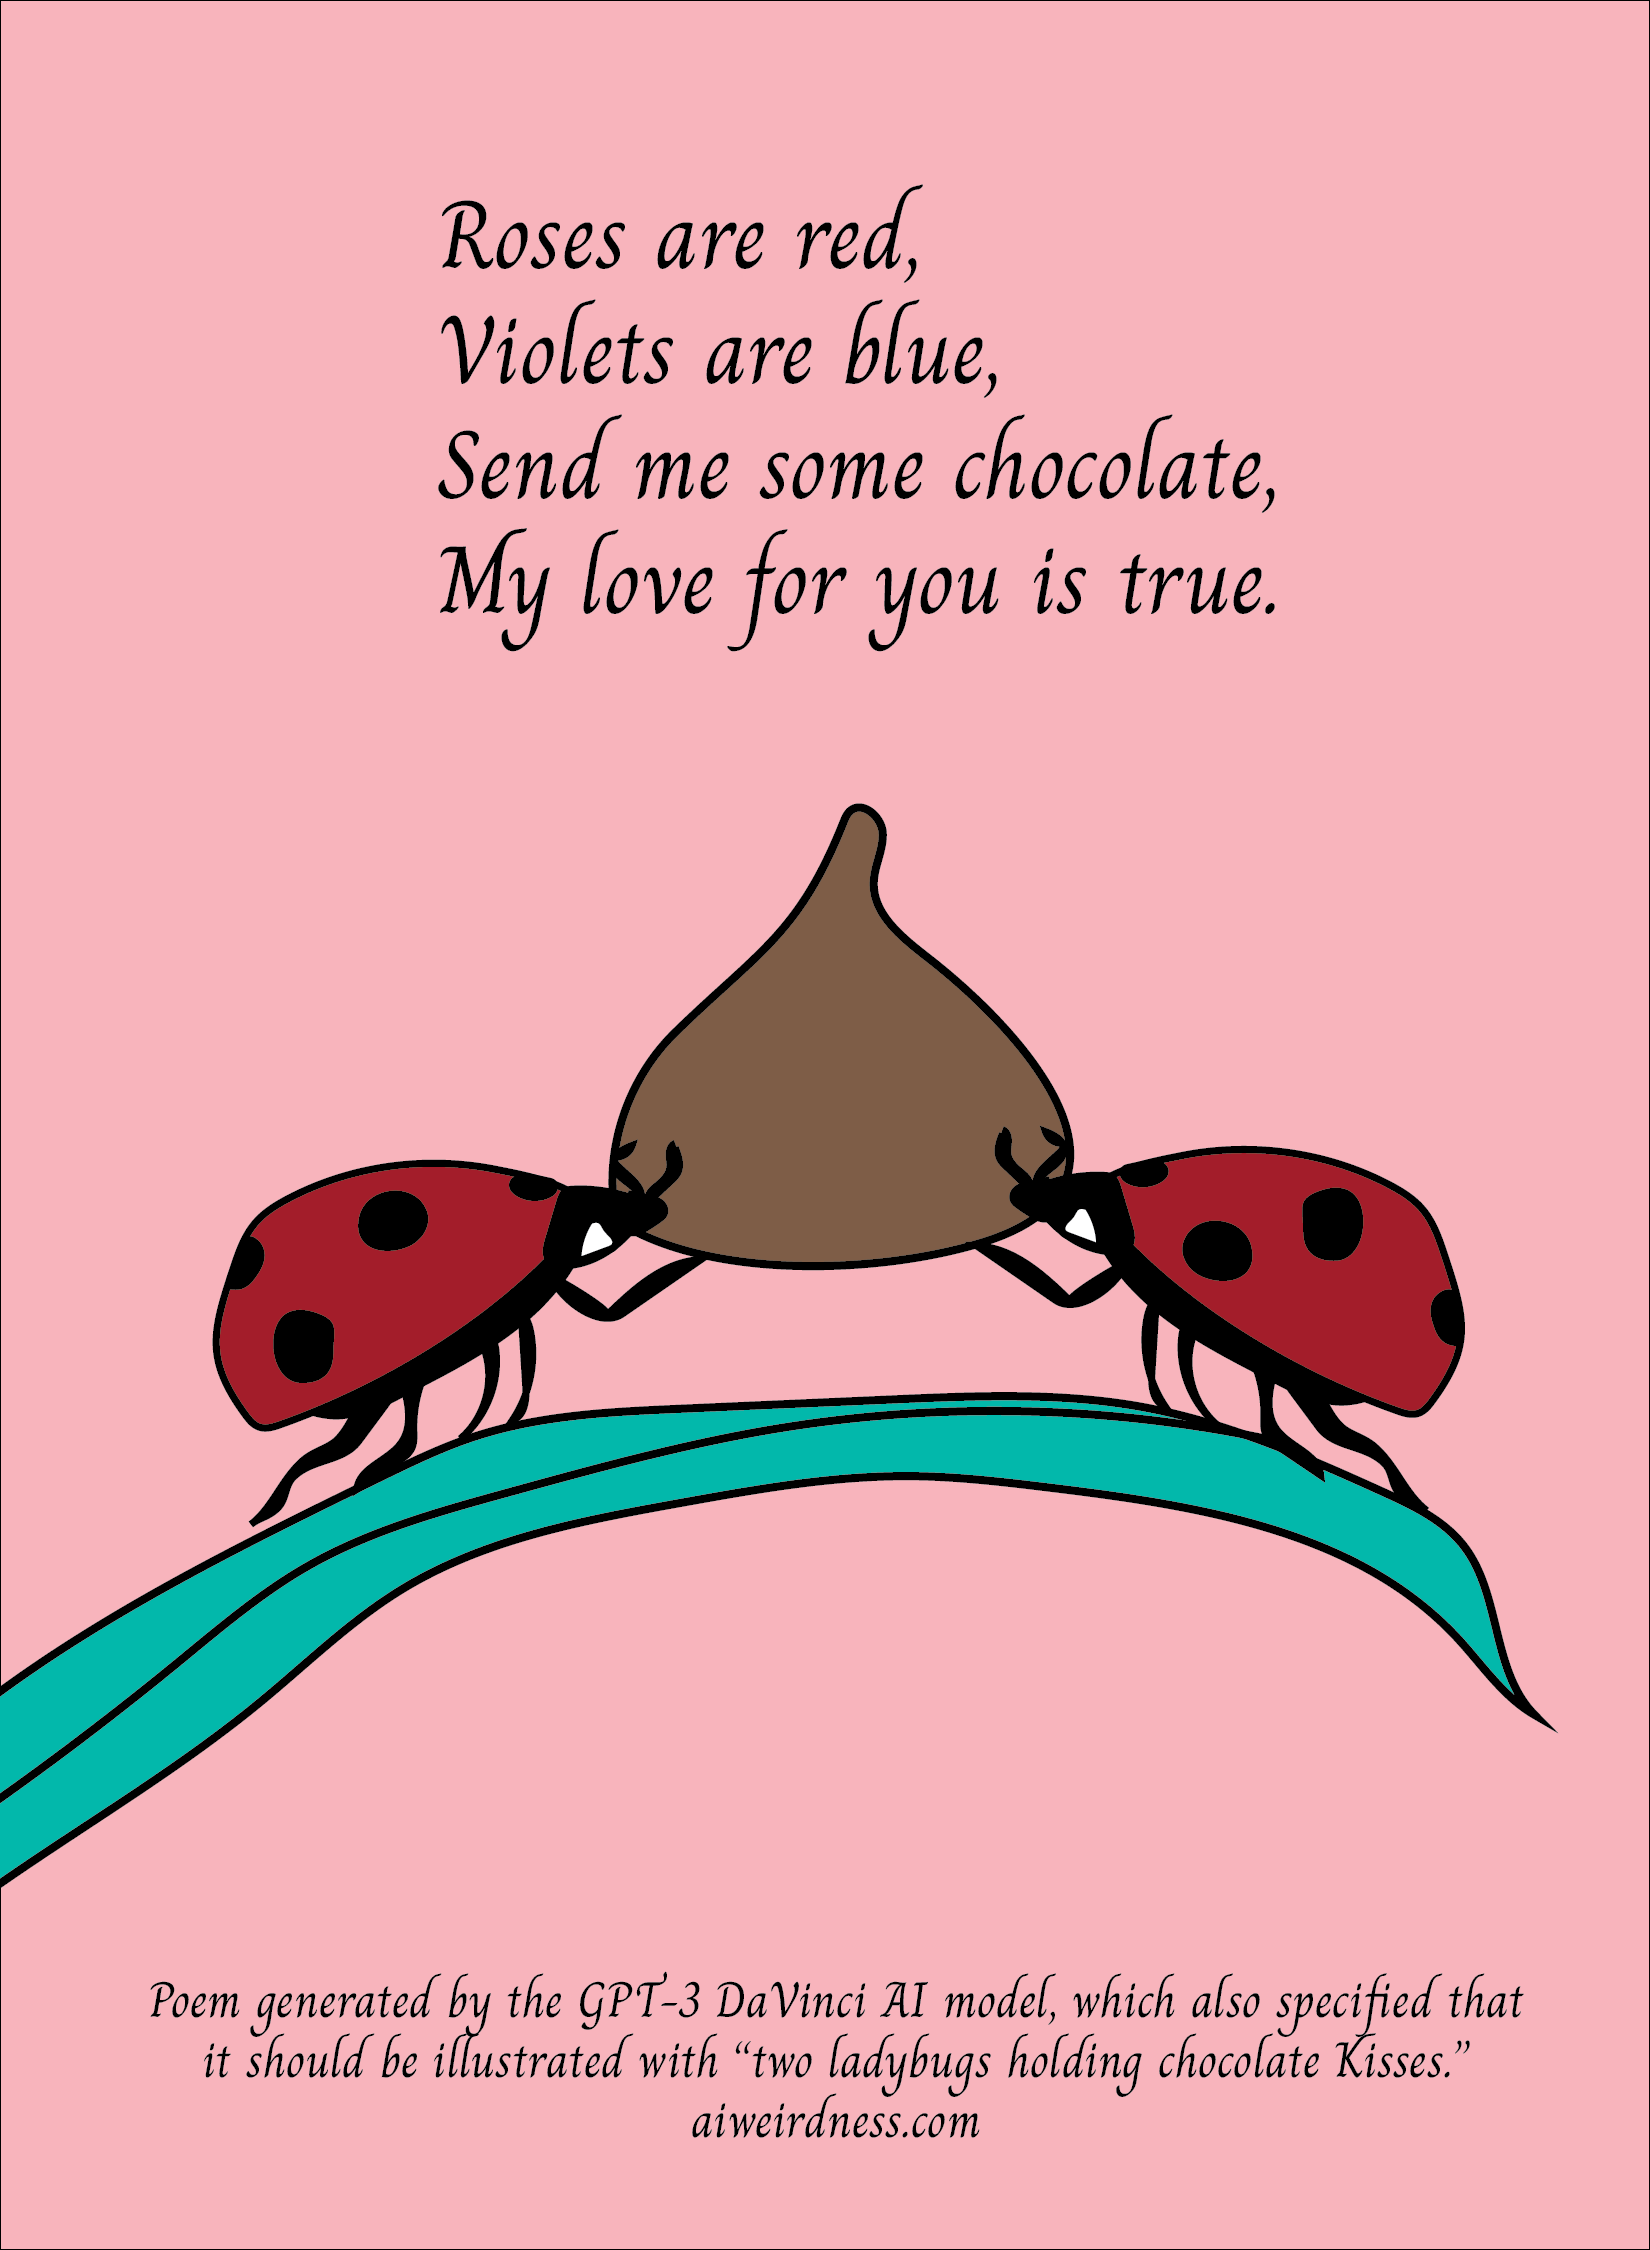 Two ladybugs holding a chocolate kiss. Text reads "Roses are red, Violets are blue, Send me some chocolate, my love for you is true."